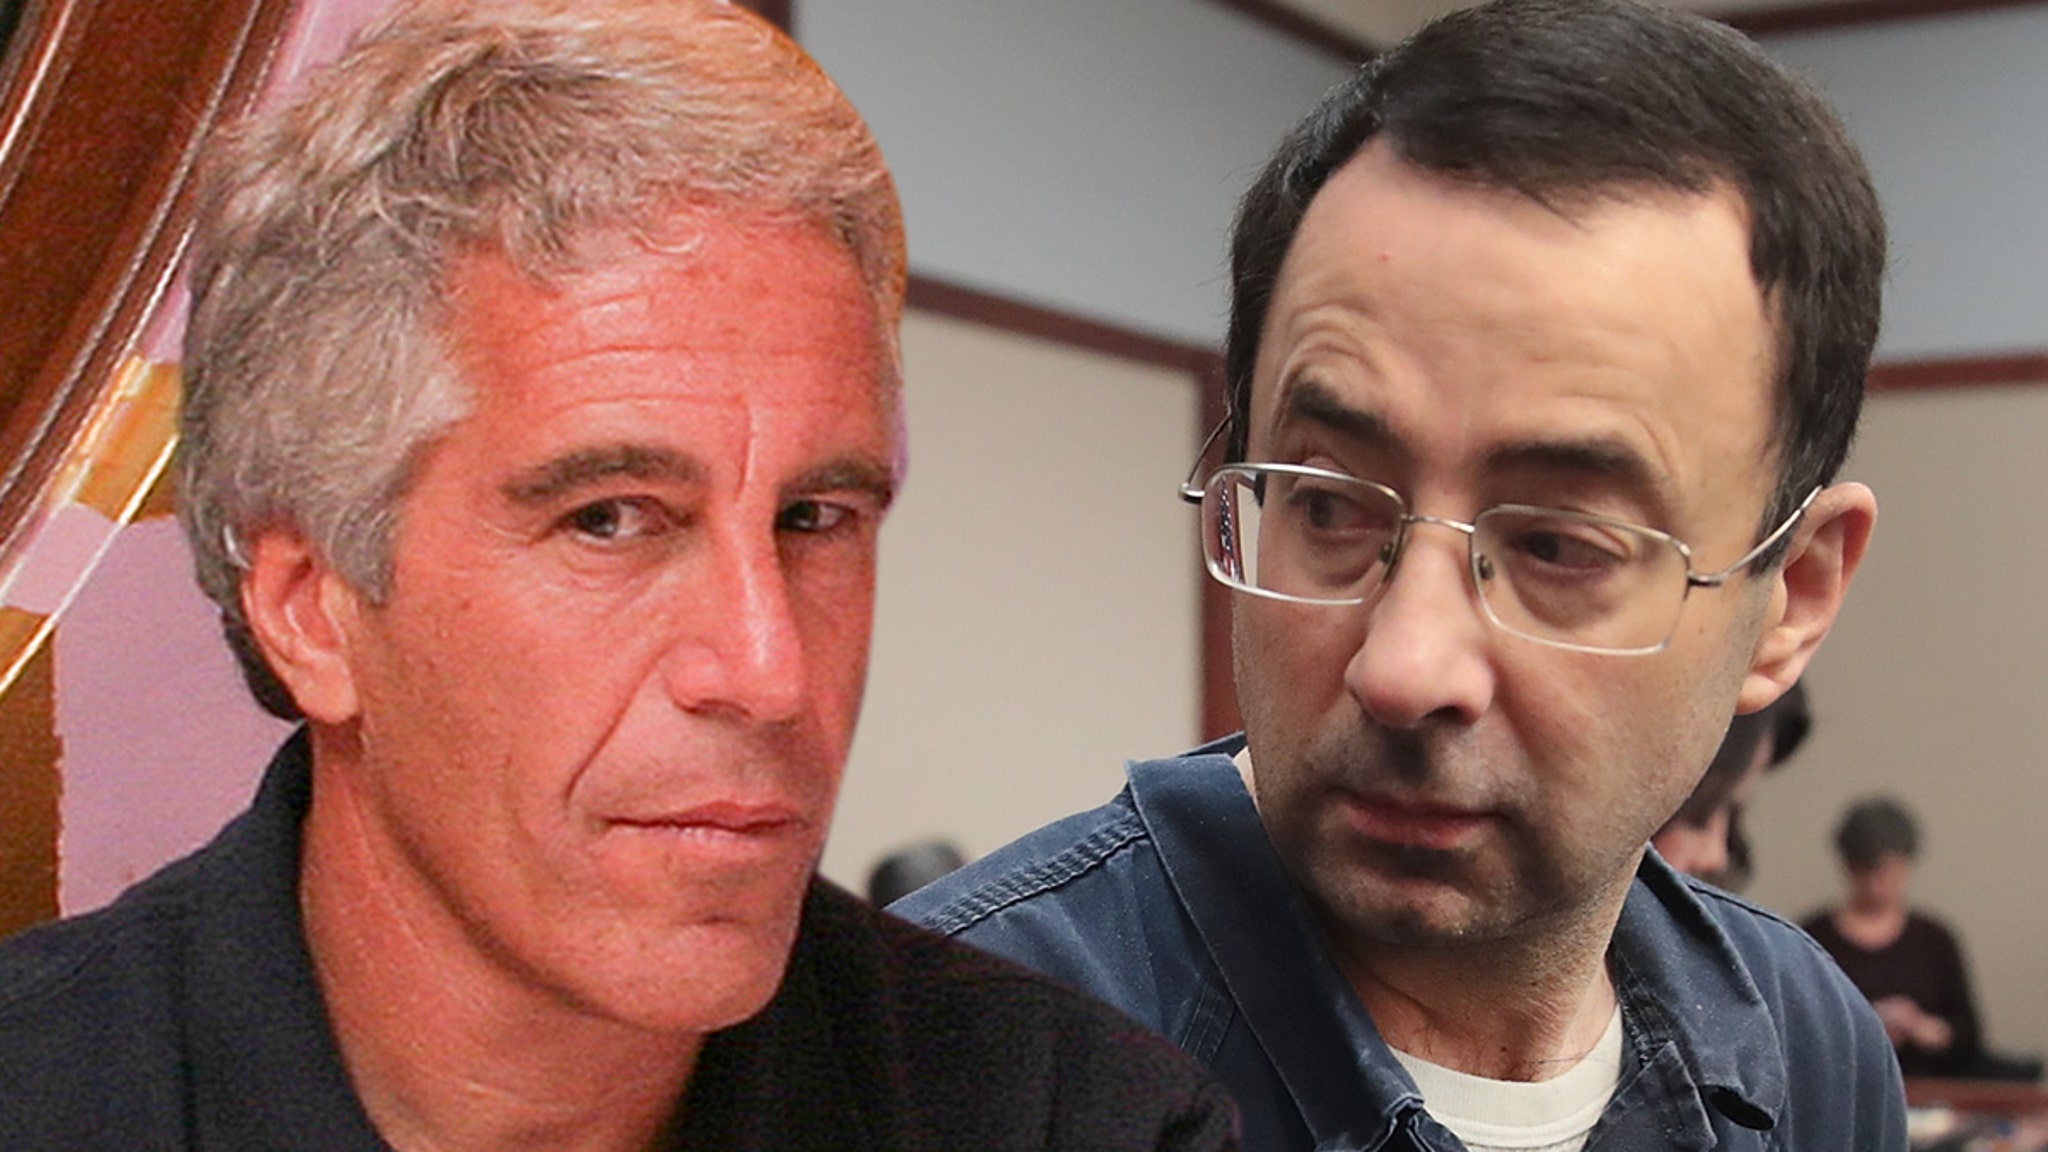 Jeffrey Epstein Tried To Contact Larry Nassar Before Suicide